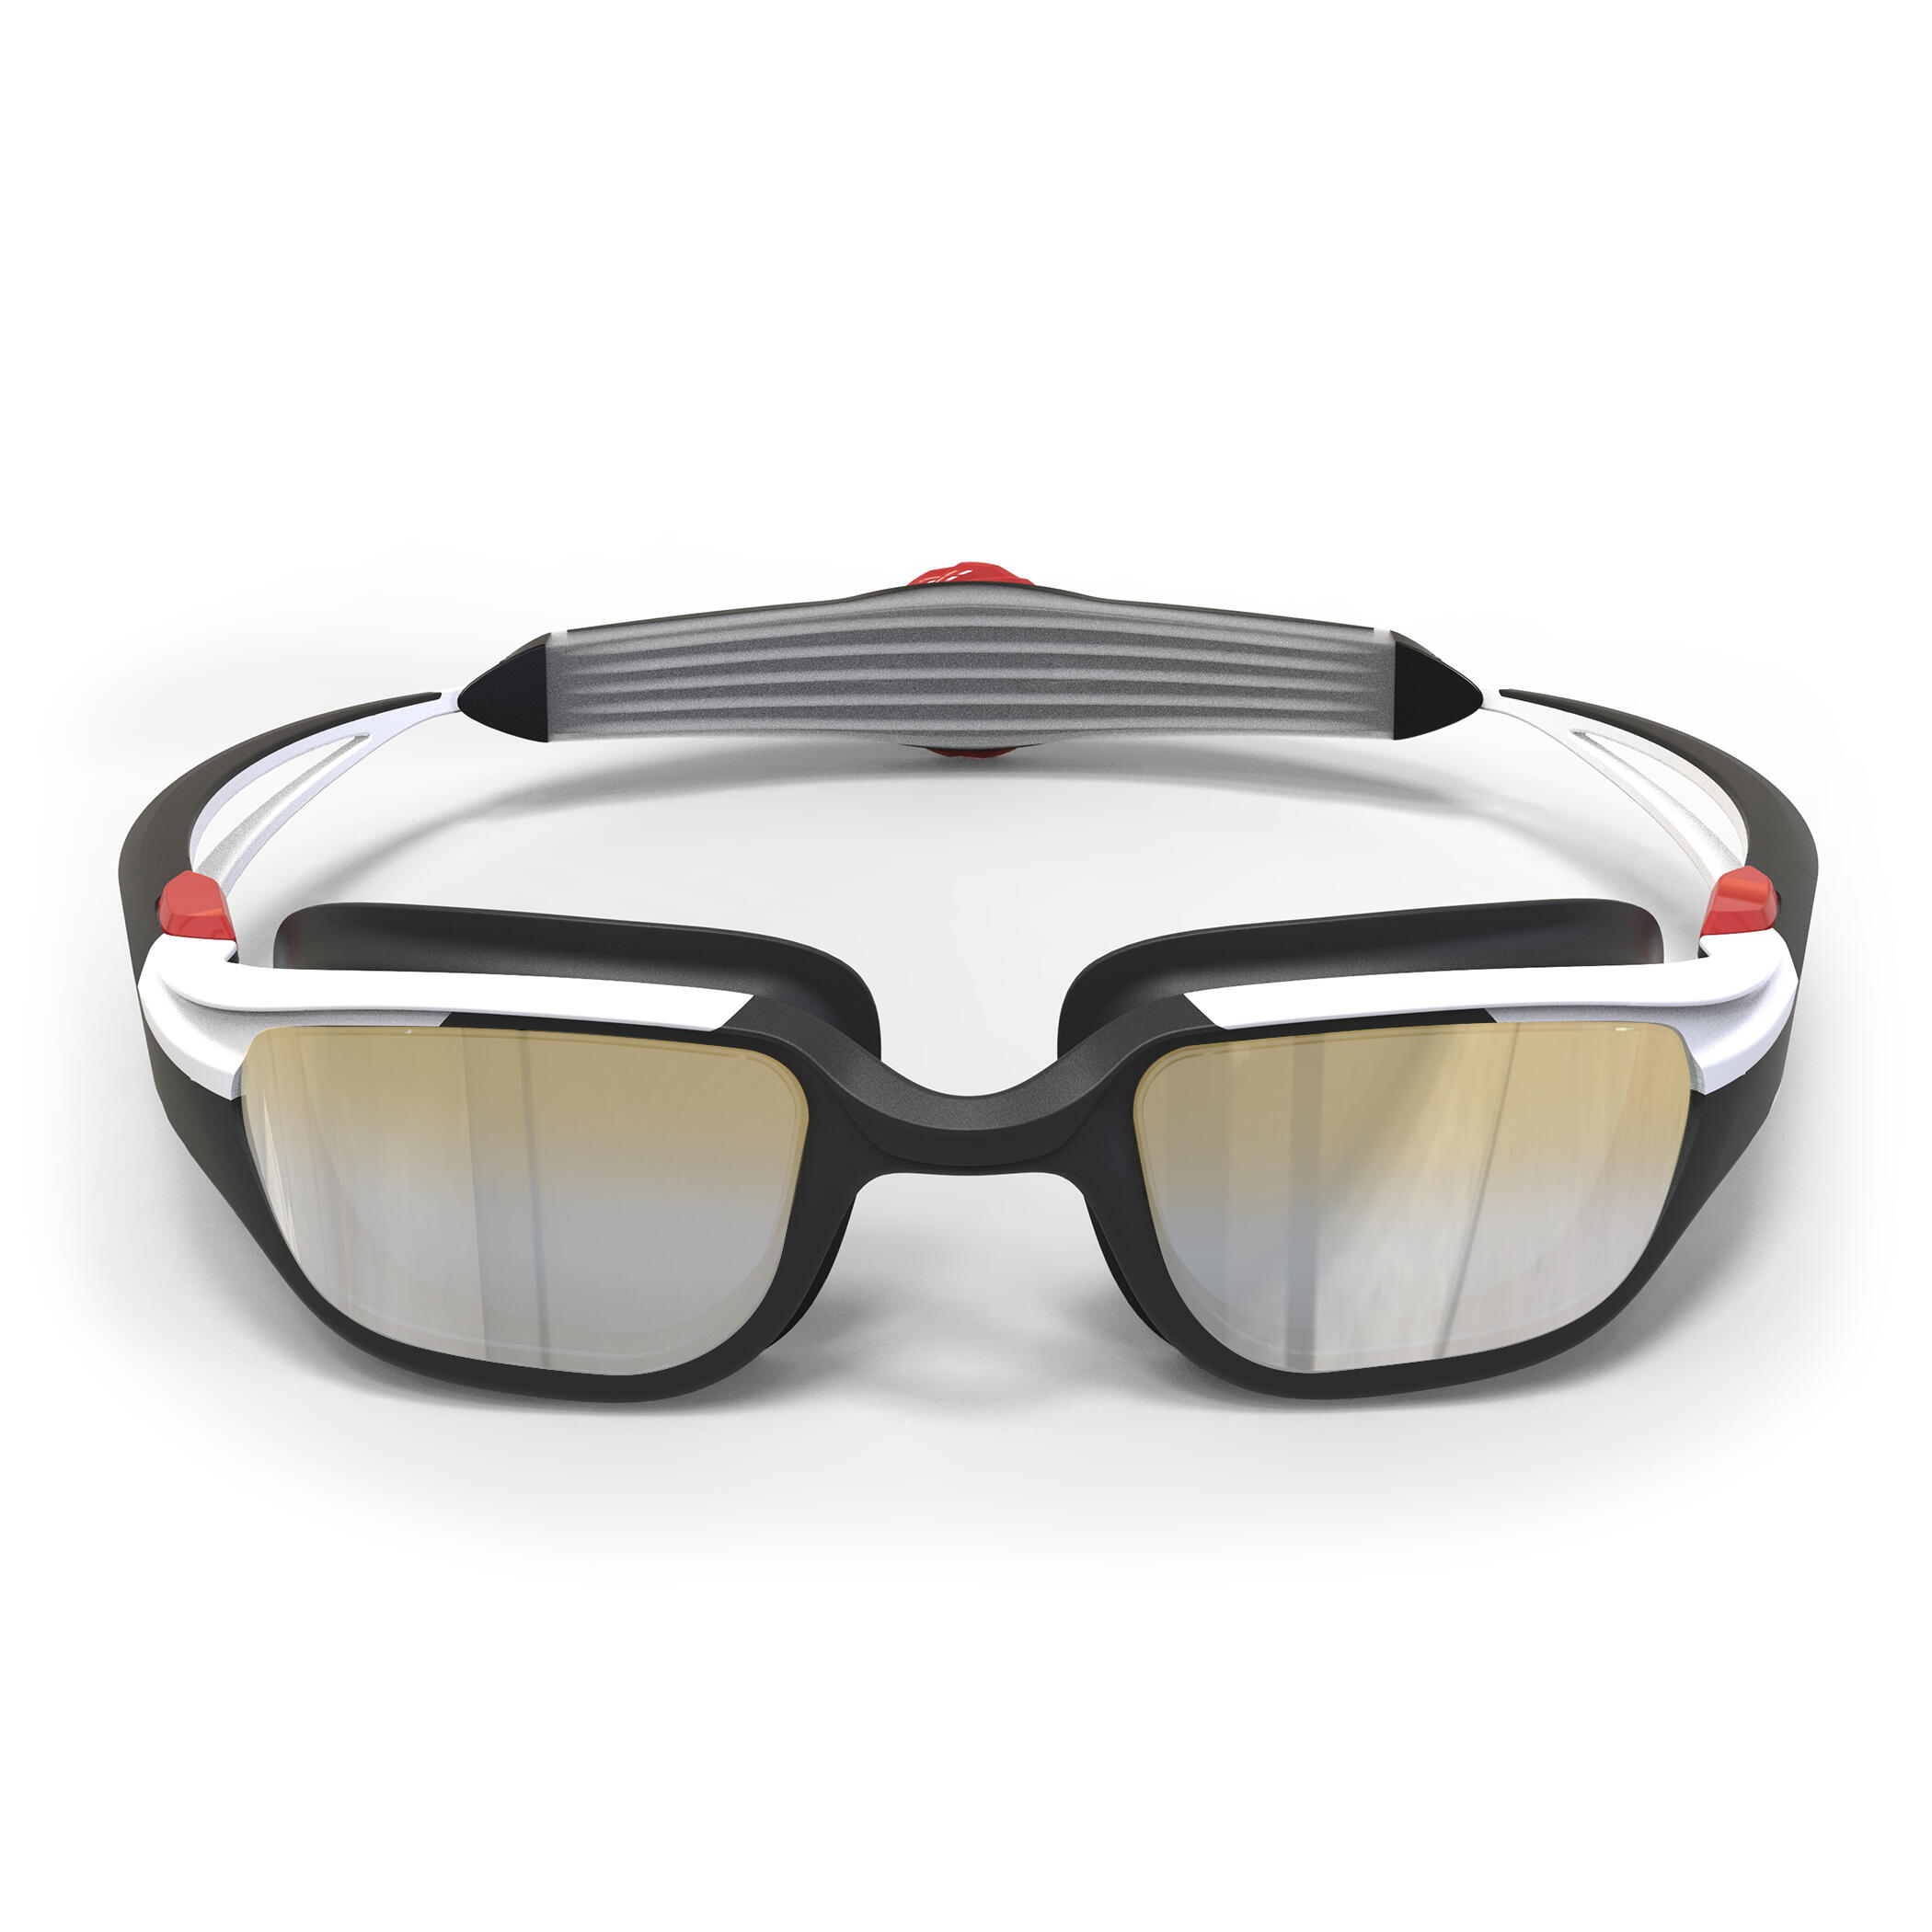 TURN swimming goggles - Mirrored lenses - Single size - Black white red 2/10